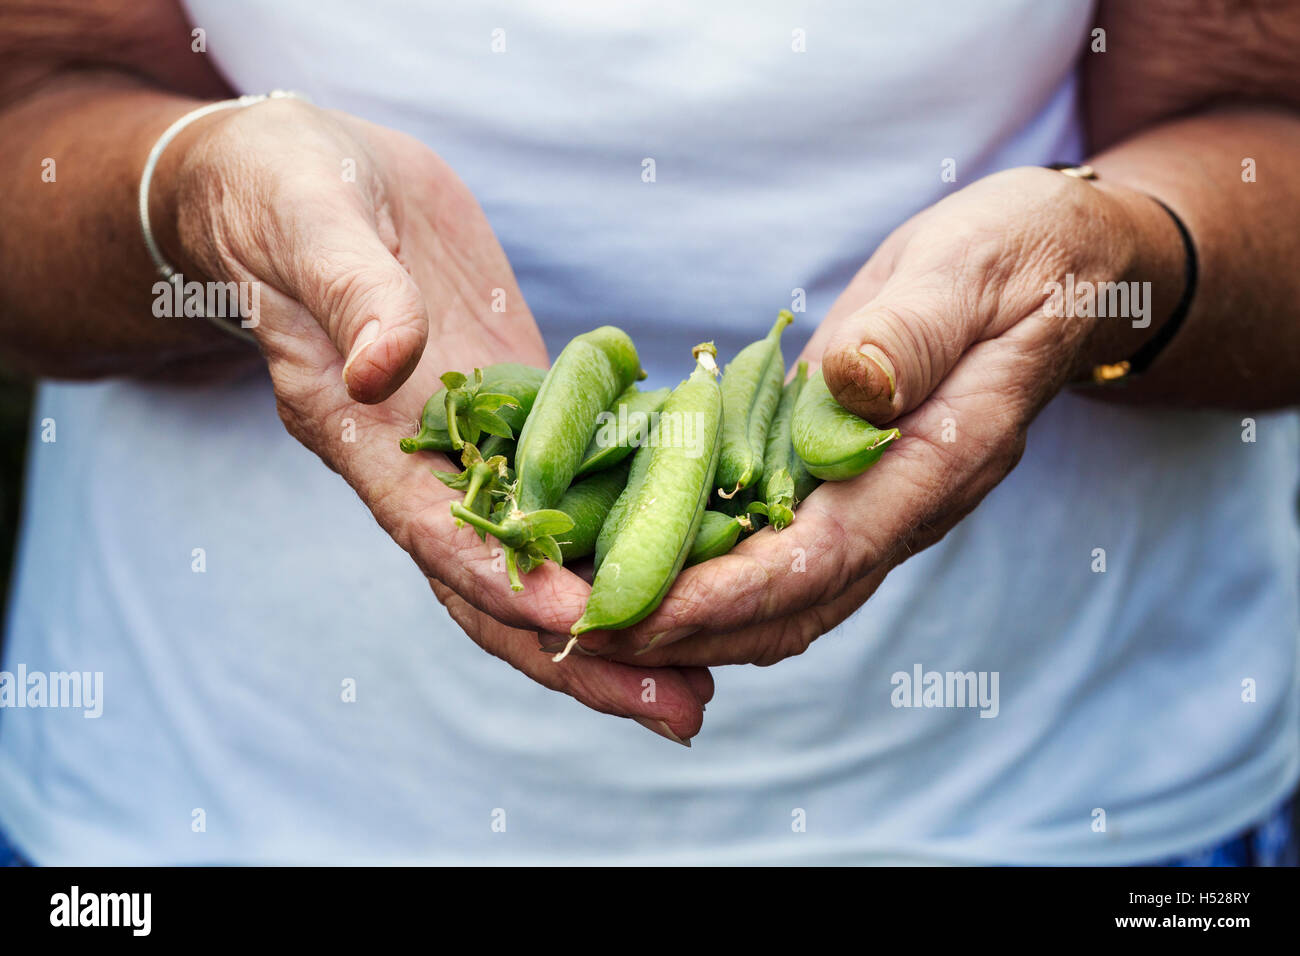 A person holding a handful of fresh picked garden pea pods. Stock Photo